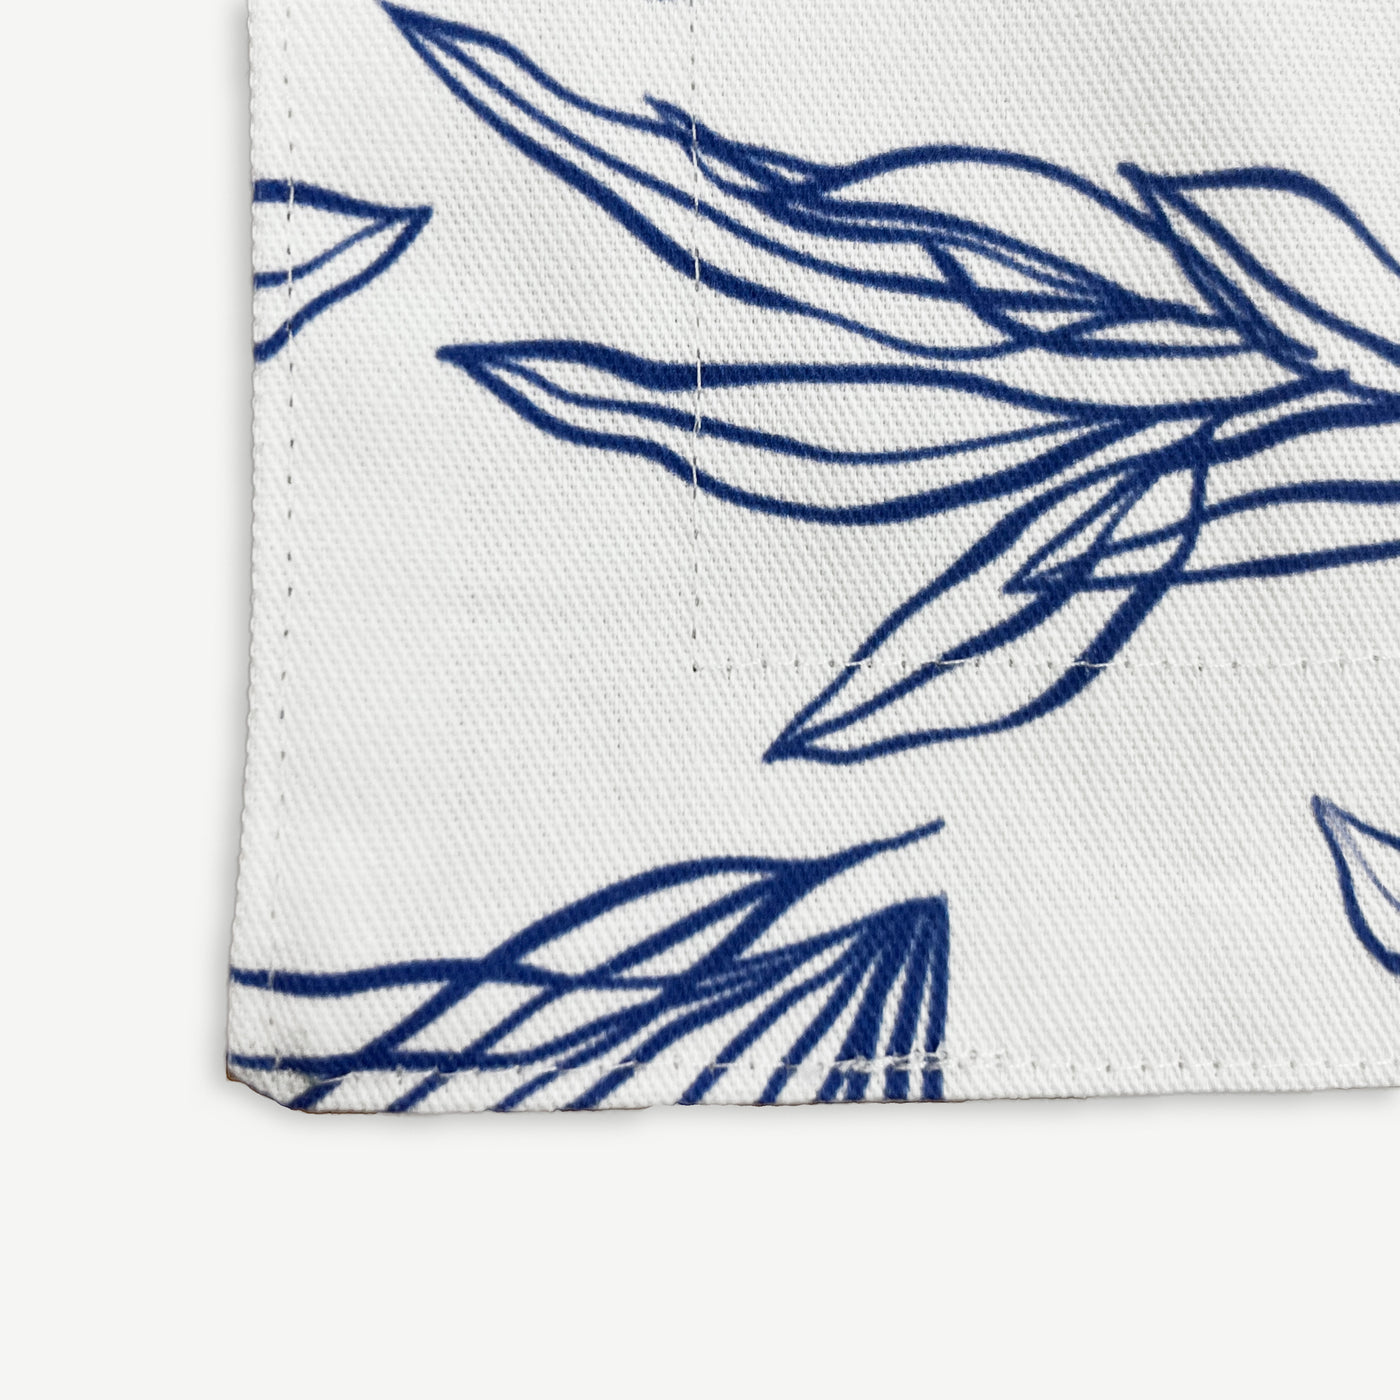 PLACEMAT SET OF 2 - LEAVES IN BLUE